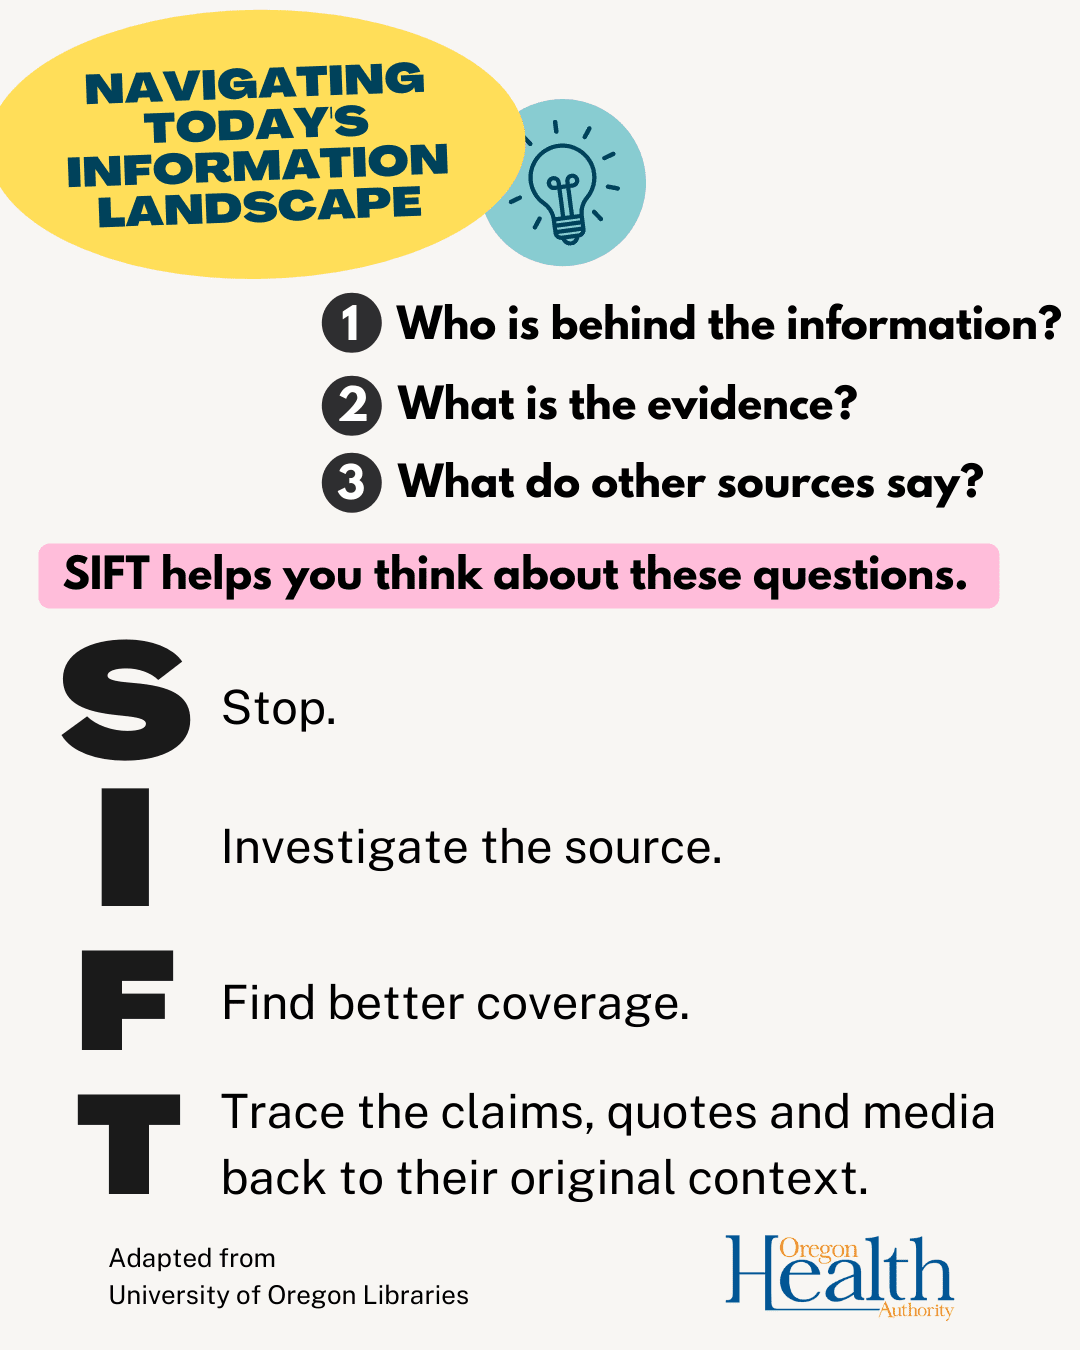 SIFT: Stop, Investigate the Source, Find a better source, Trace the claims to original context. 